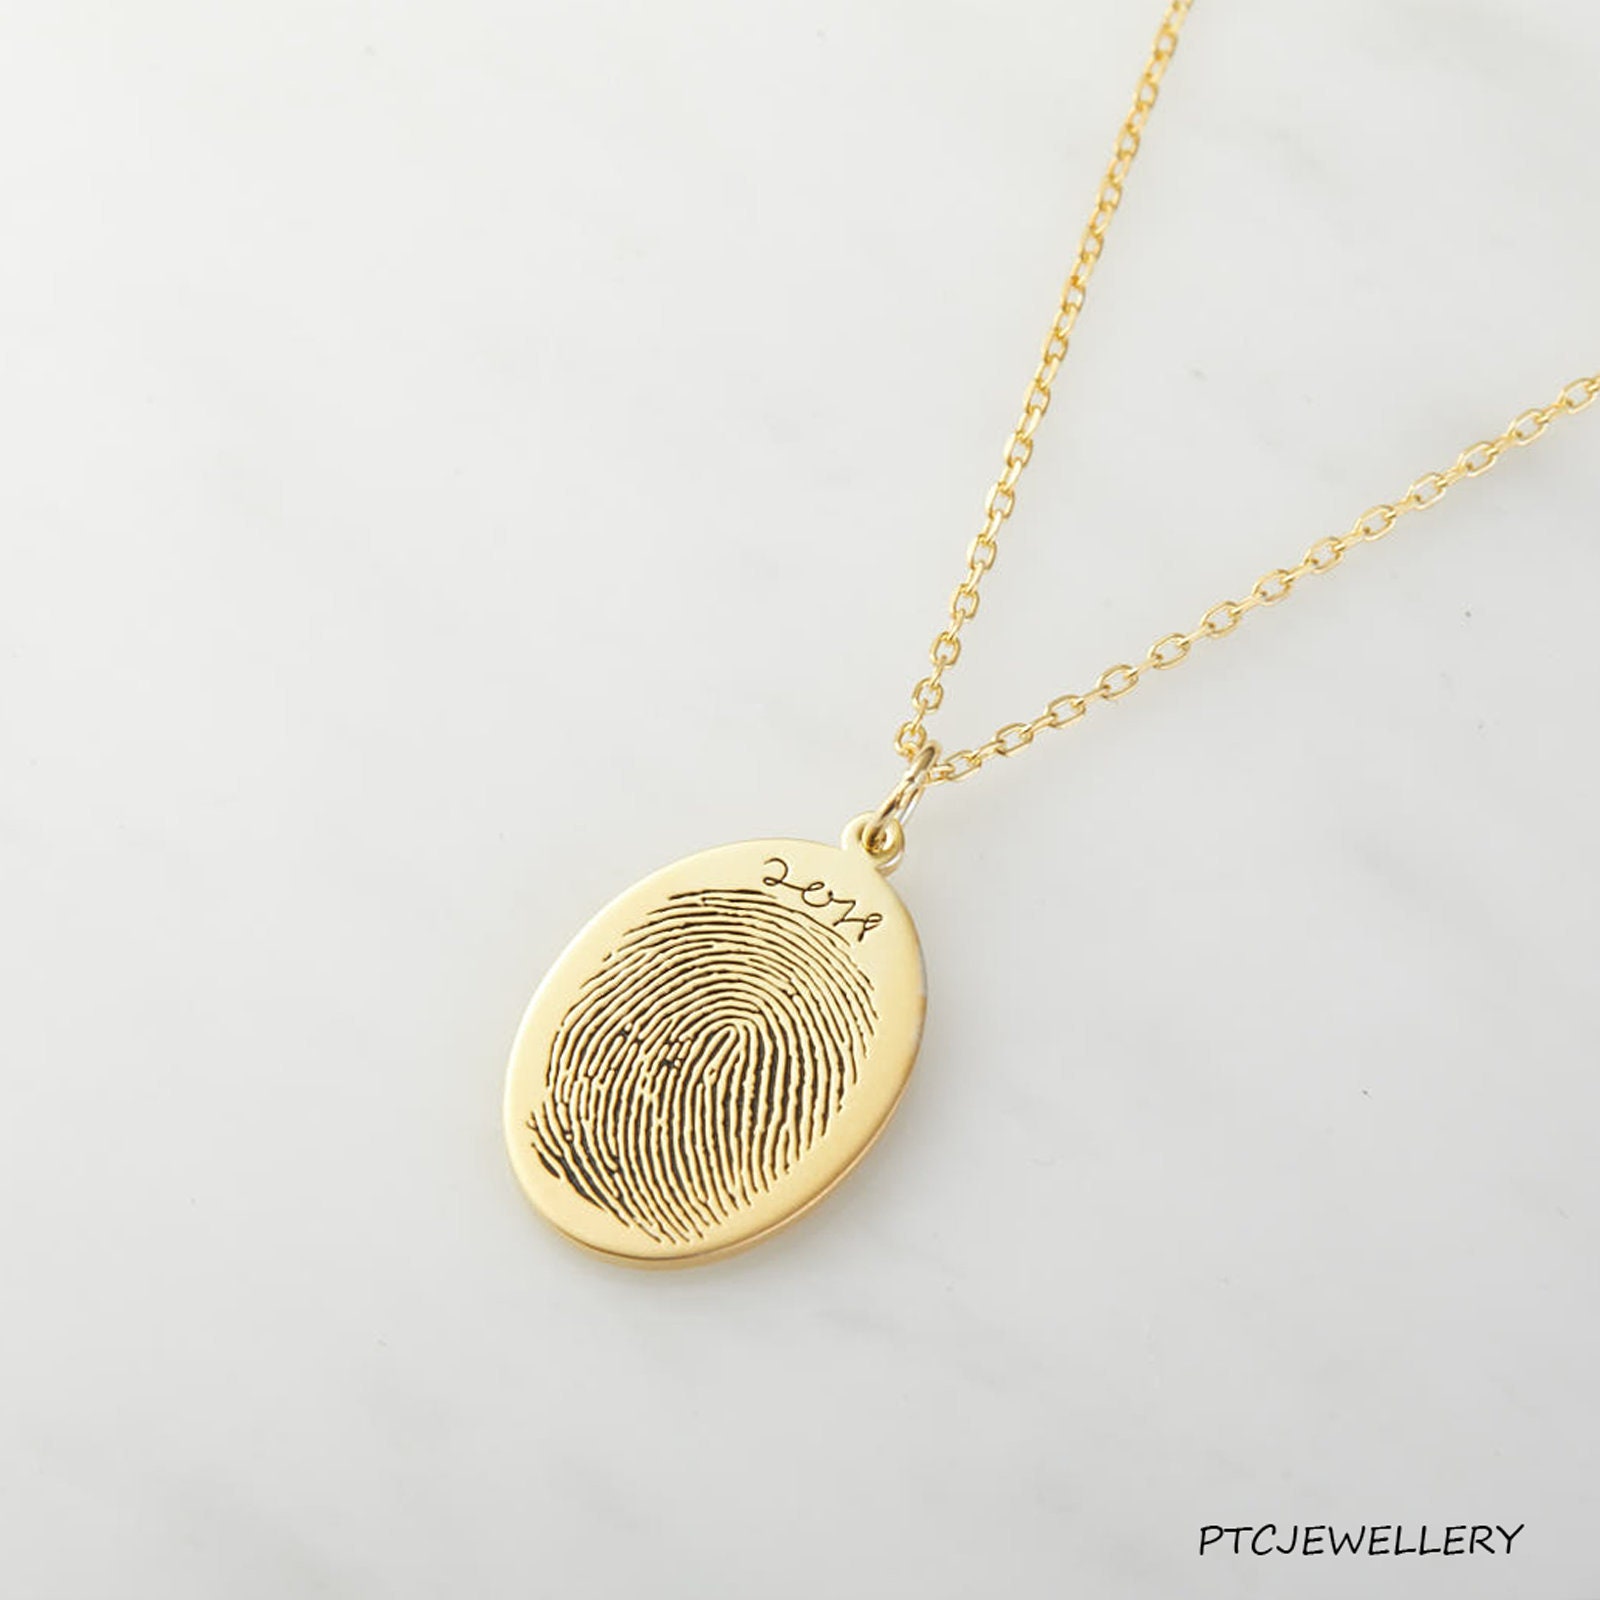 Keep Your Family Close with Our Fingerprint Engraved Fine Jewellery |  Philippa Herbert